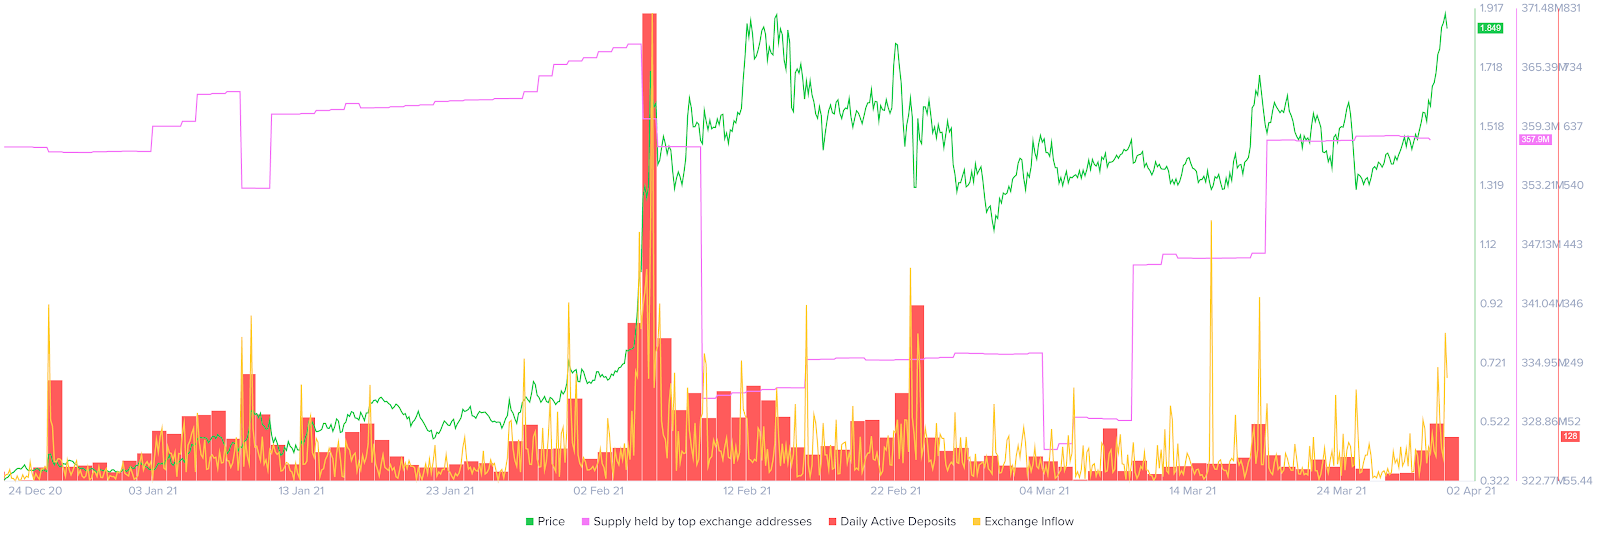 0x Supply Held by Exchange Addresses, Daily Active Deposit chart